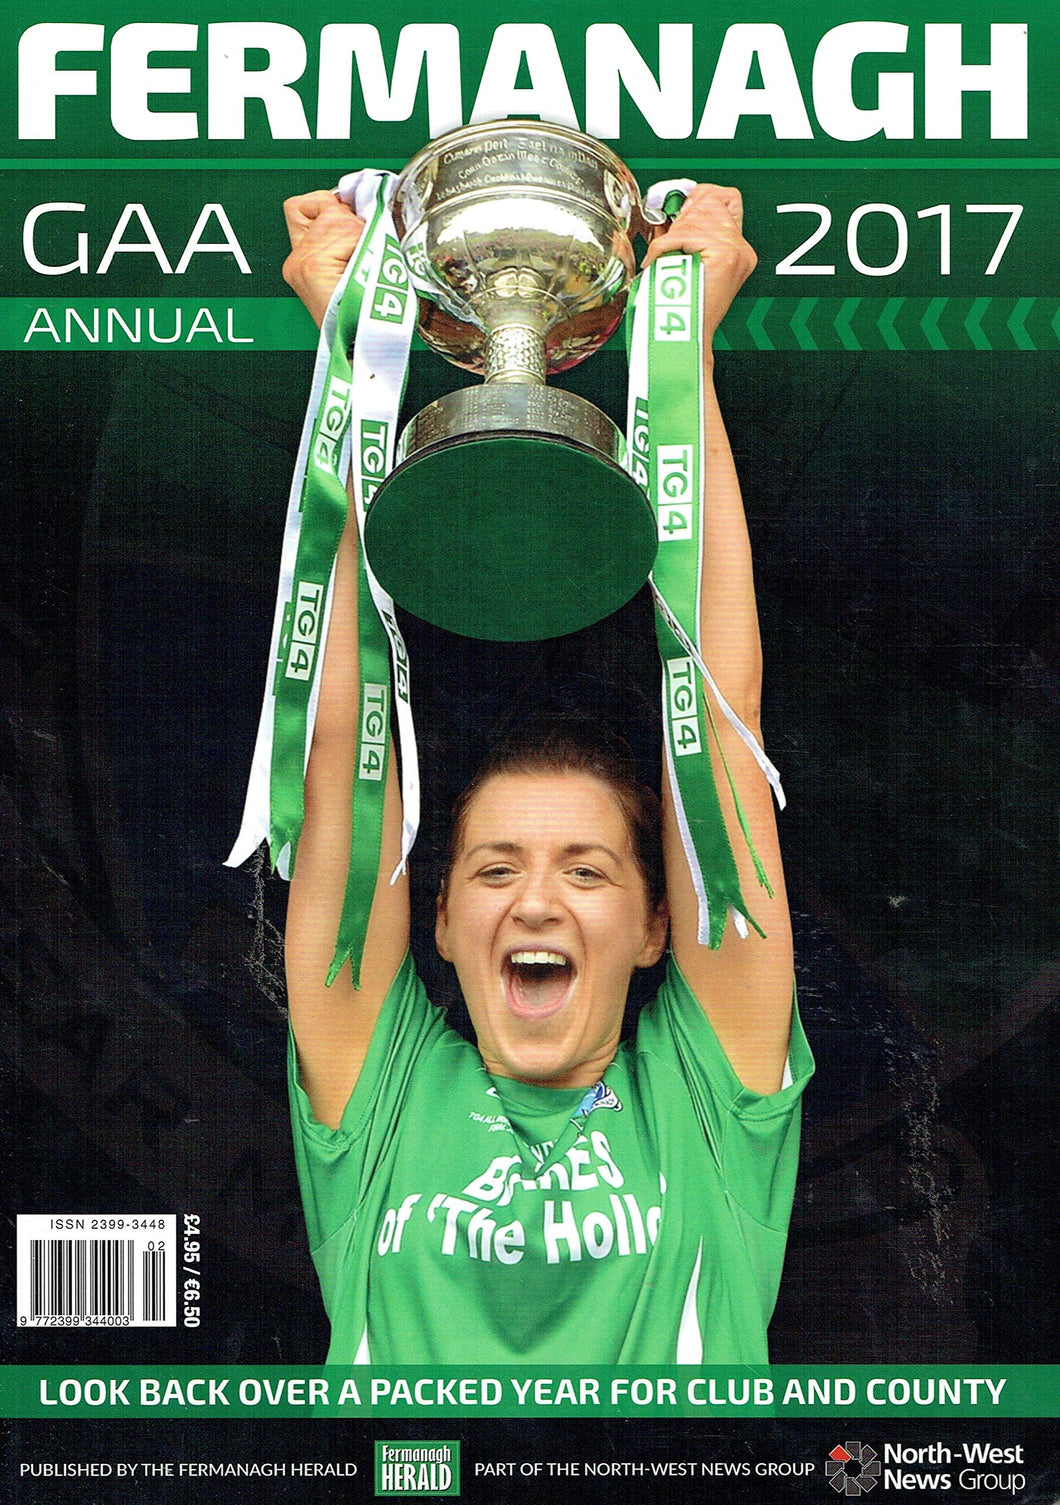 Fermanagh GAA Annual 2017: Look Back Over a Packed Year for Club and Country